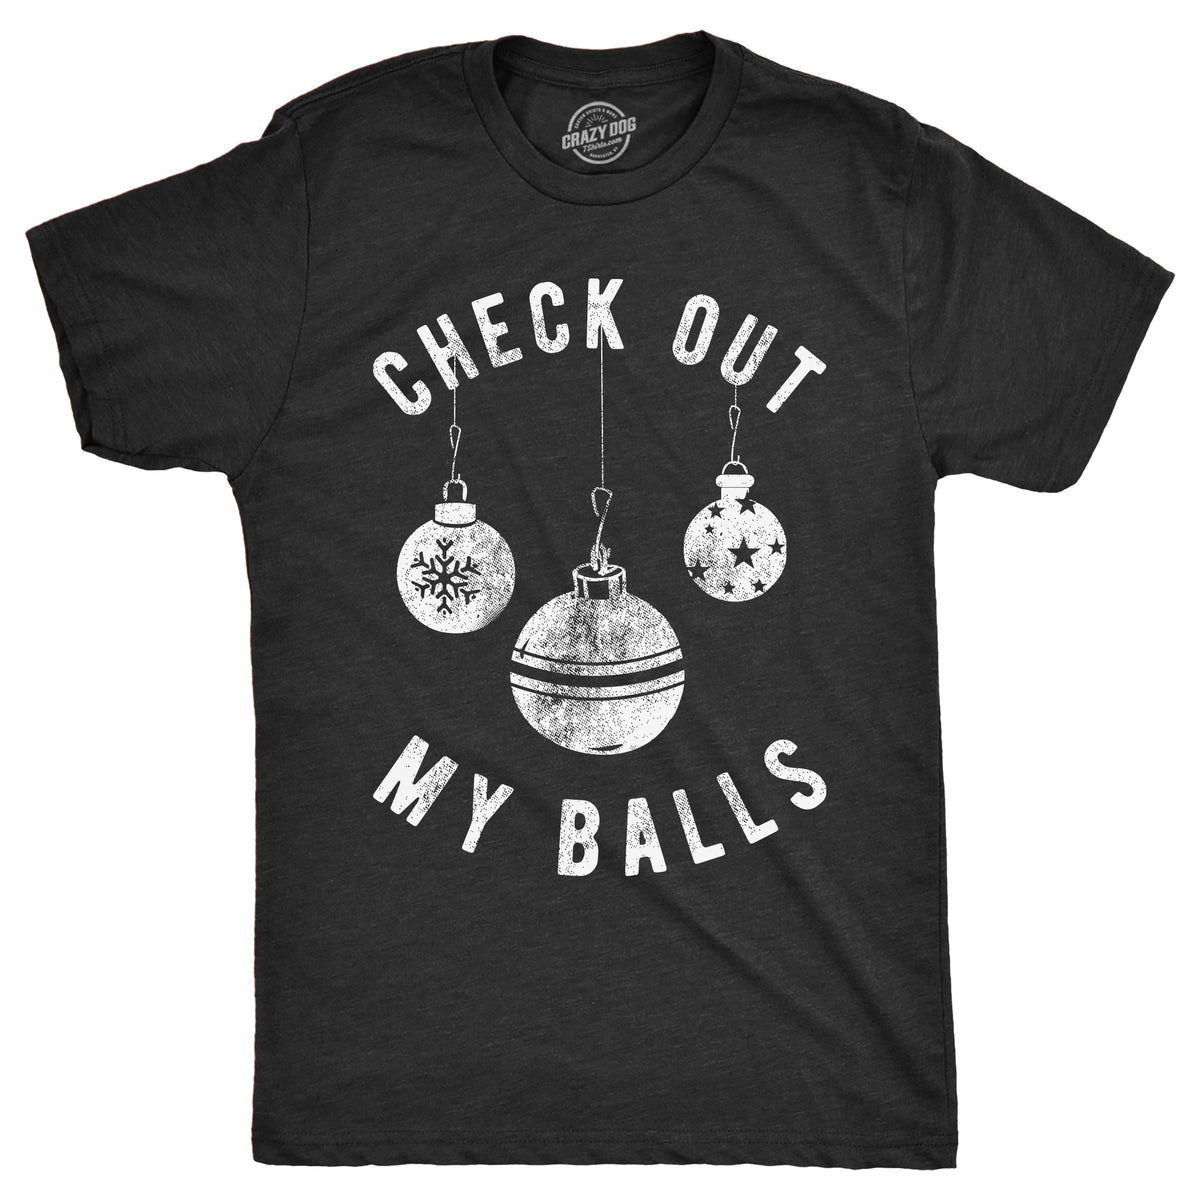 Funny Heather Black - Check Out My Balls Check Out My Balls Mens T Shirt Nerdy Christmas sex Tee